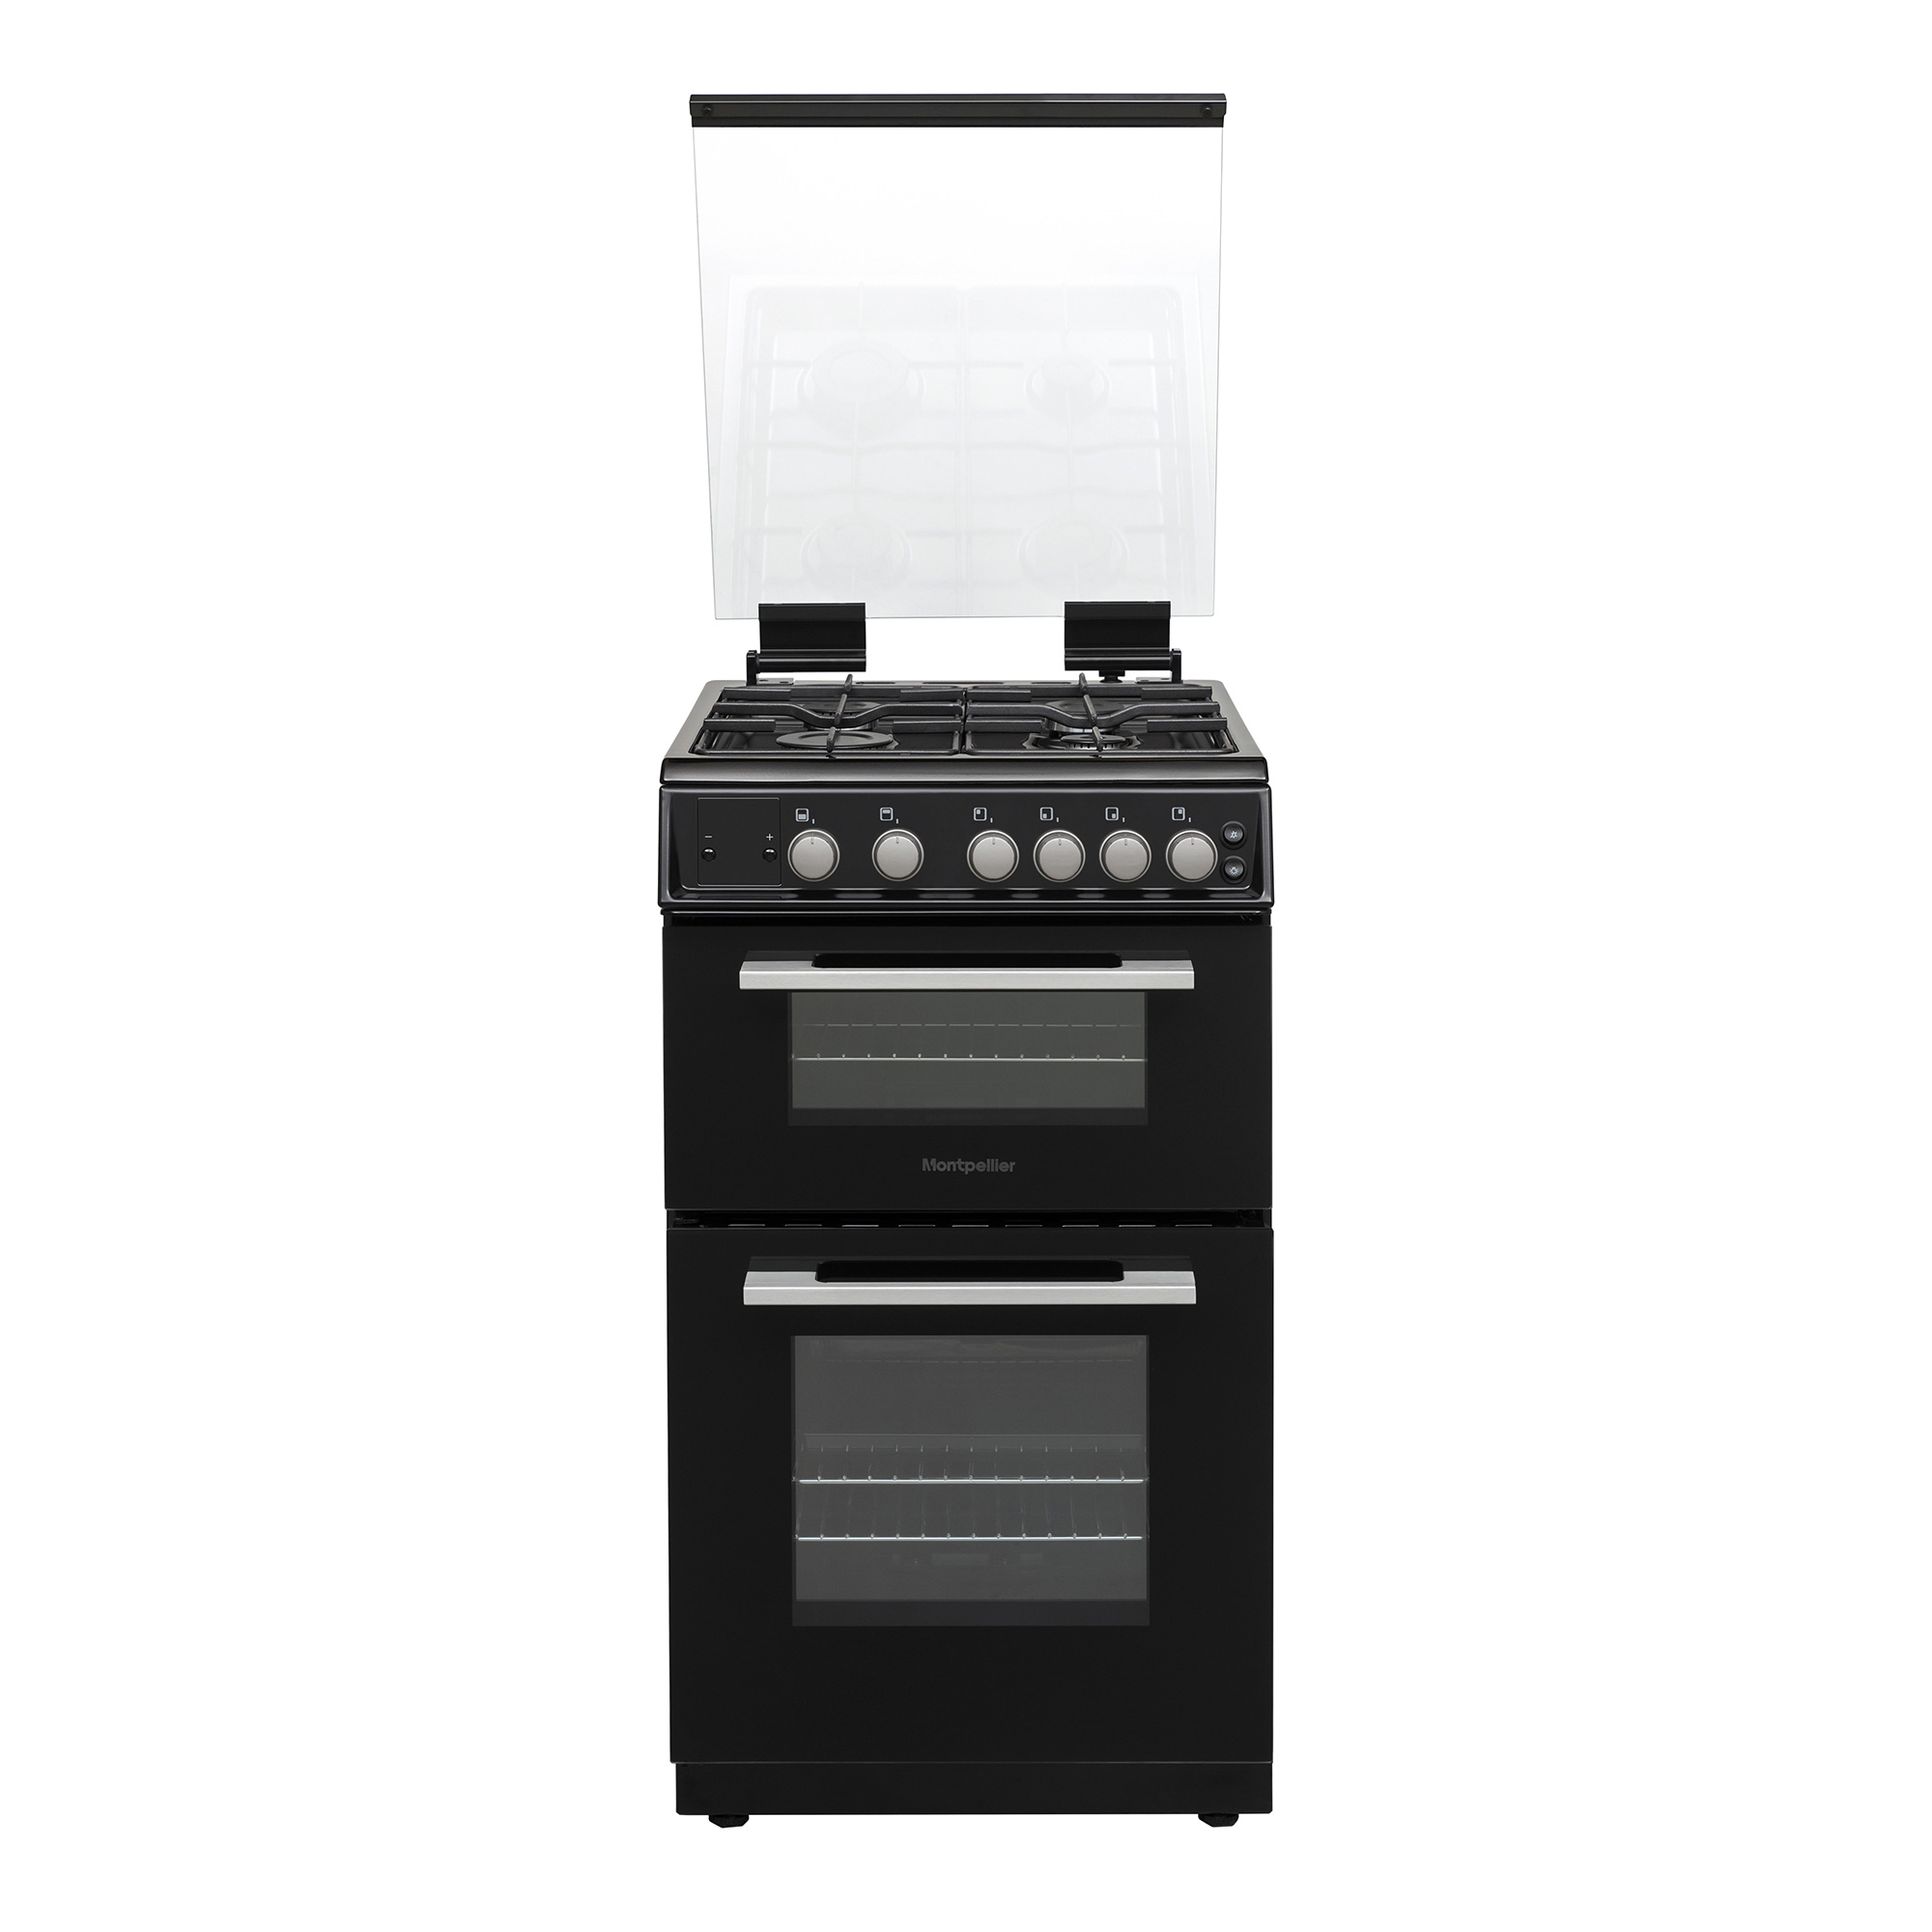 Montpellier 500mm Double Gas Oven & Grill Black